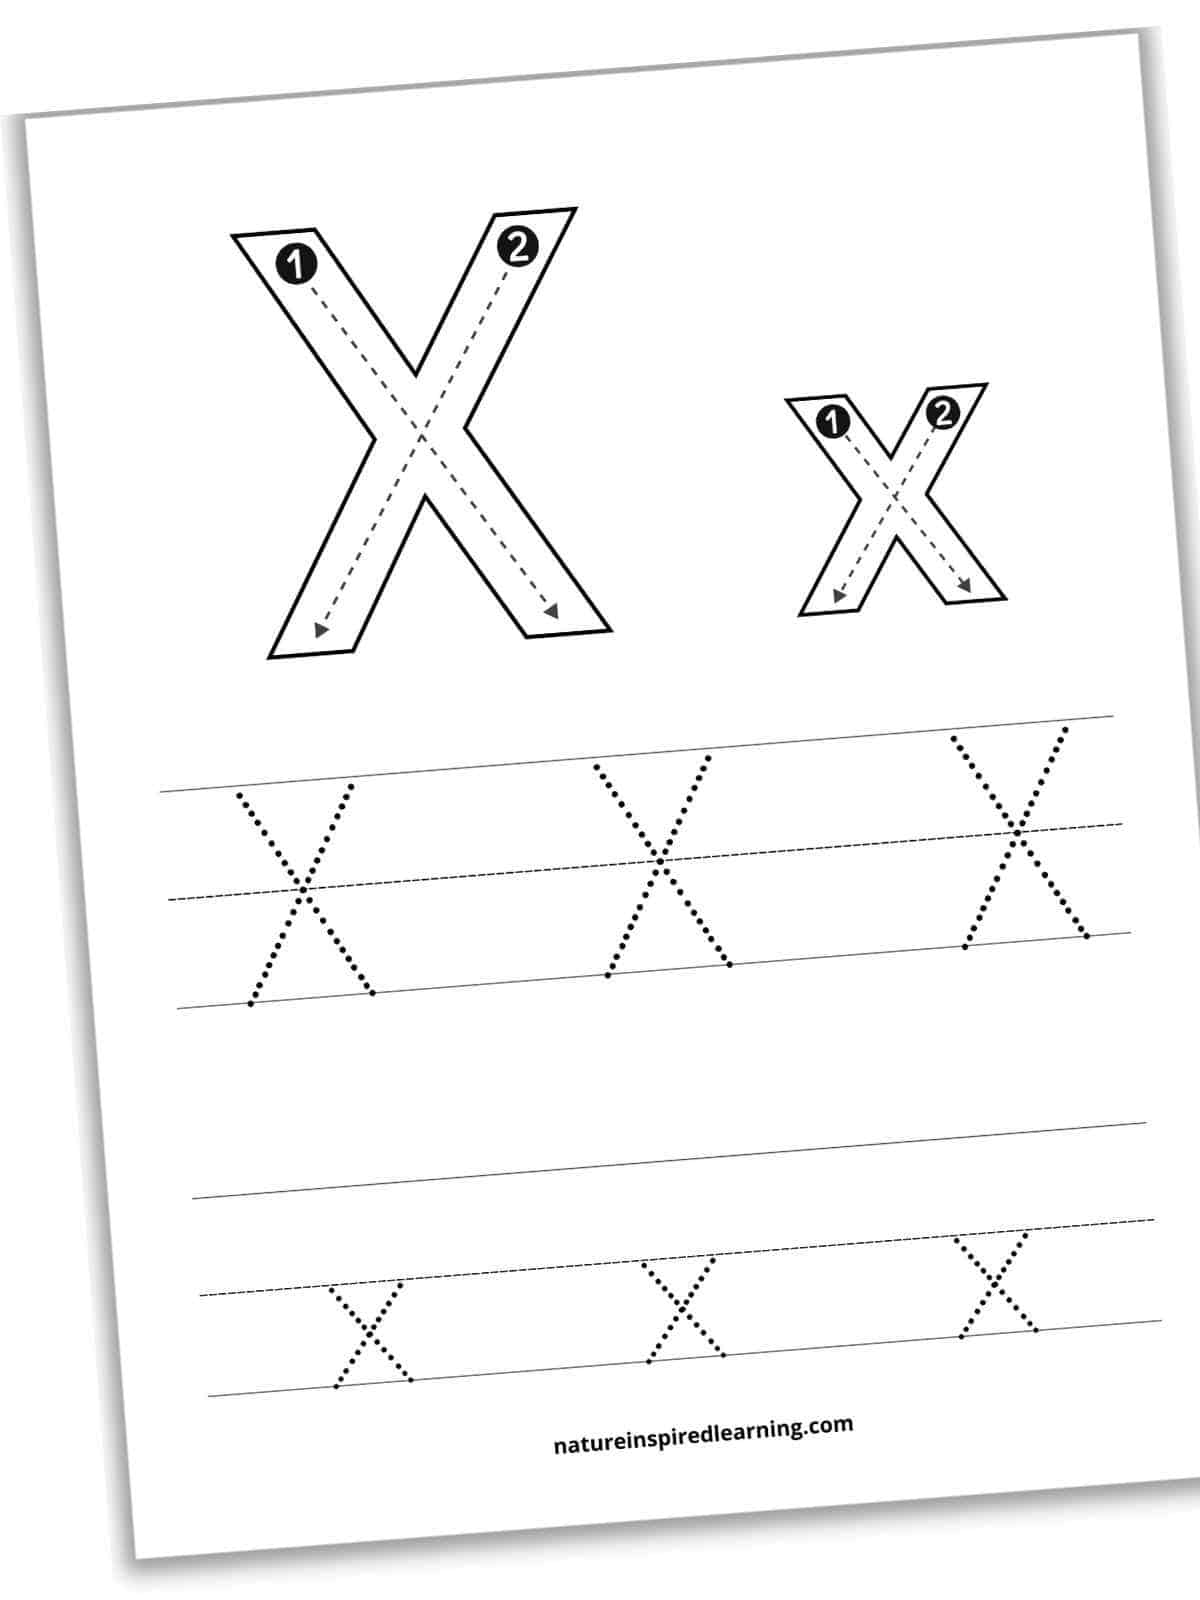 worksheet with large X x outlines with numbers, arrows, and dashed within each letter above two sets of lines with dotted letter X and x's